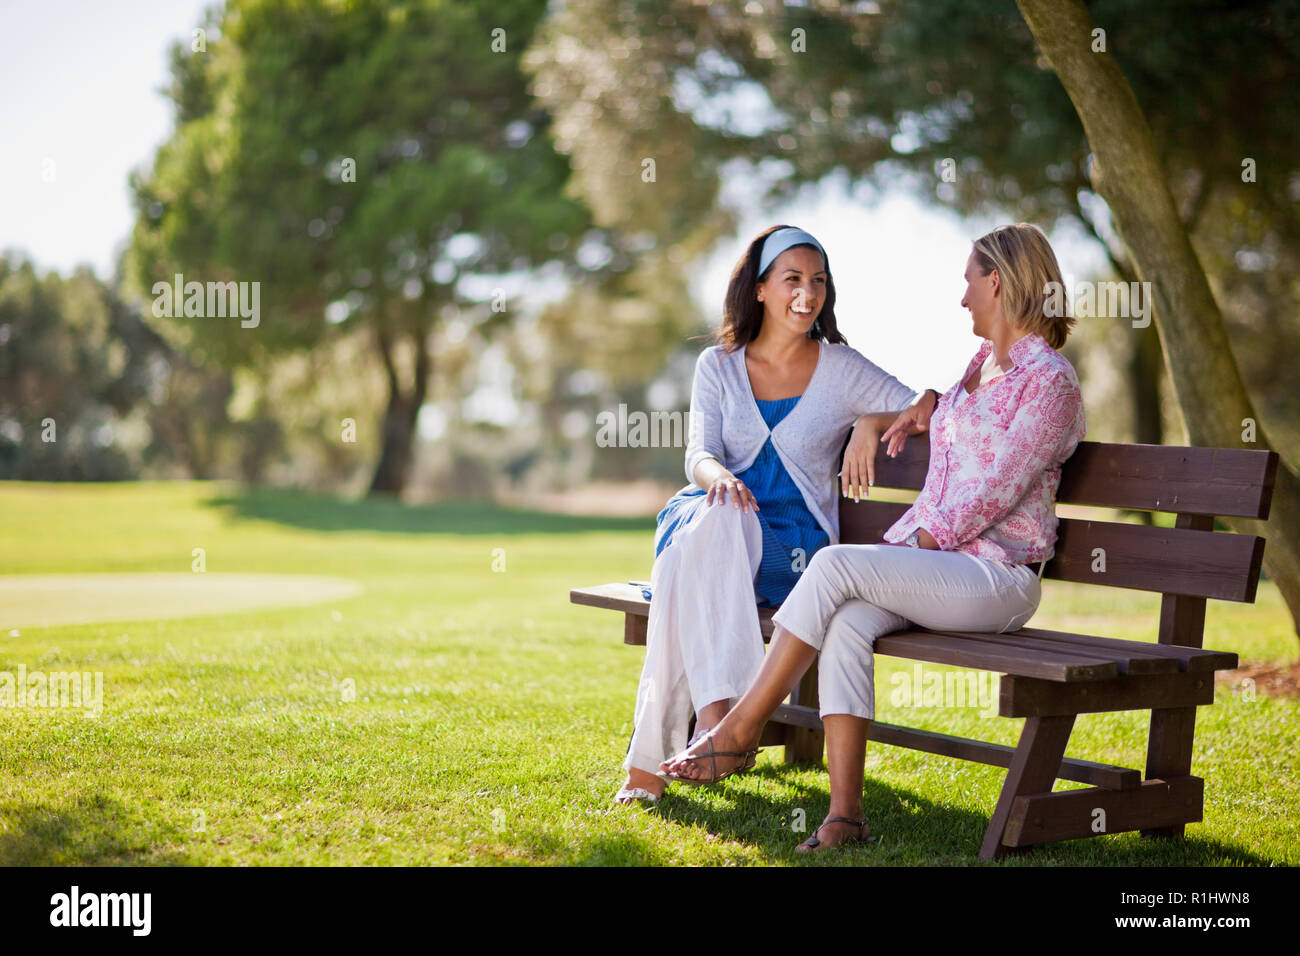 Happy friends talking together in a serene green park. Stock Photo